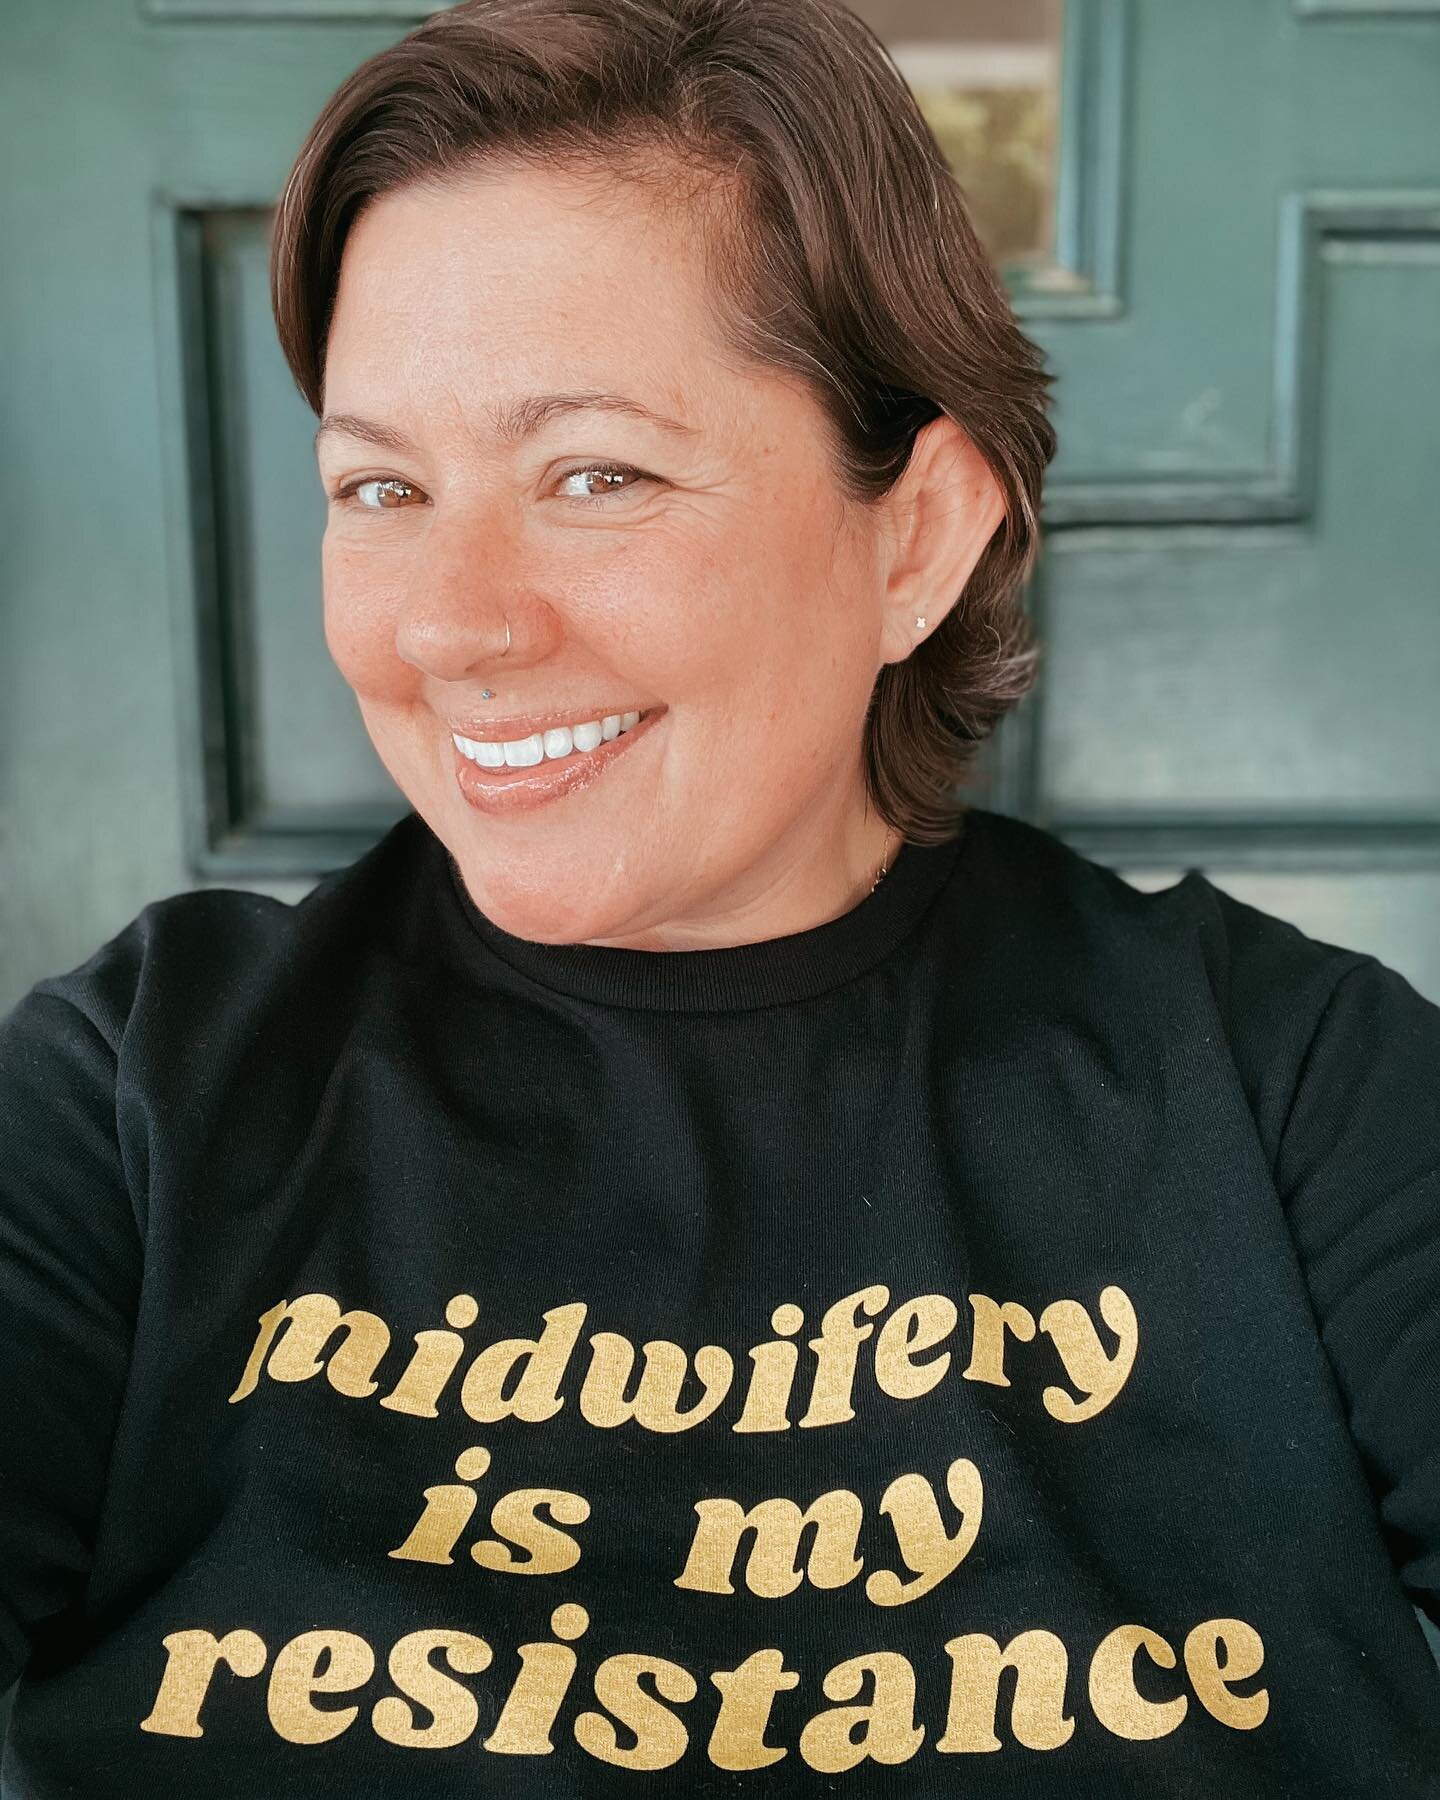 Hi it&rsquo;s me. Your neighborhood midwife apprentice.
***
Did you know there are several paths to midwifery?
***
Did you know that midwifery is regulated at the state (not federal) level?
***
Did you know that just because someone isn&rsquo;t licen